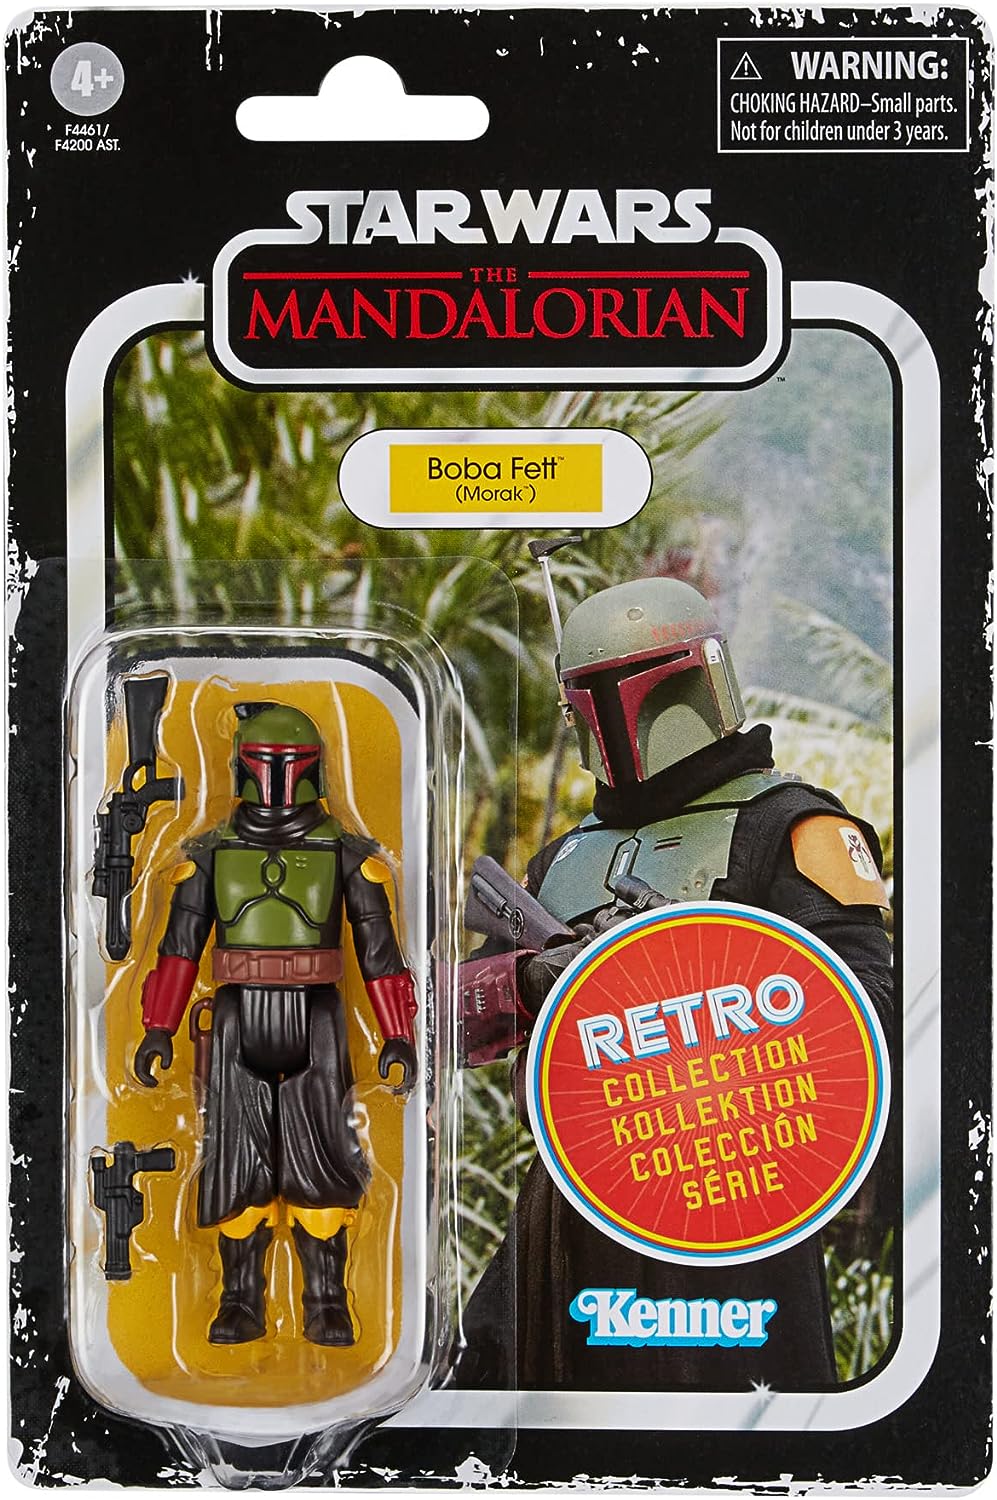 STAR WARS Retro Collection Boba Fett (Morak) Toy 3.75-Inch-Scale The Mandalorian Collectible Action Figure